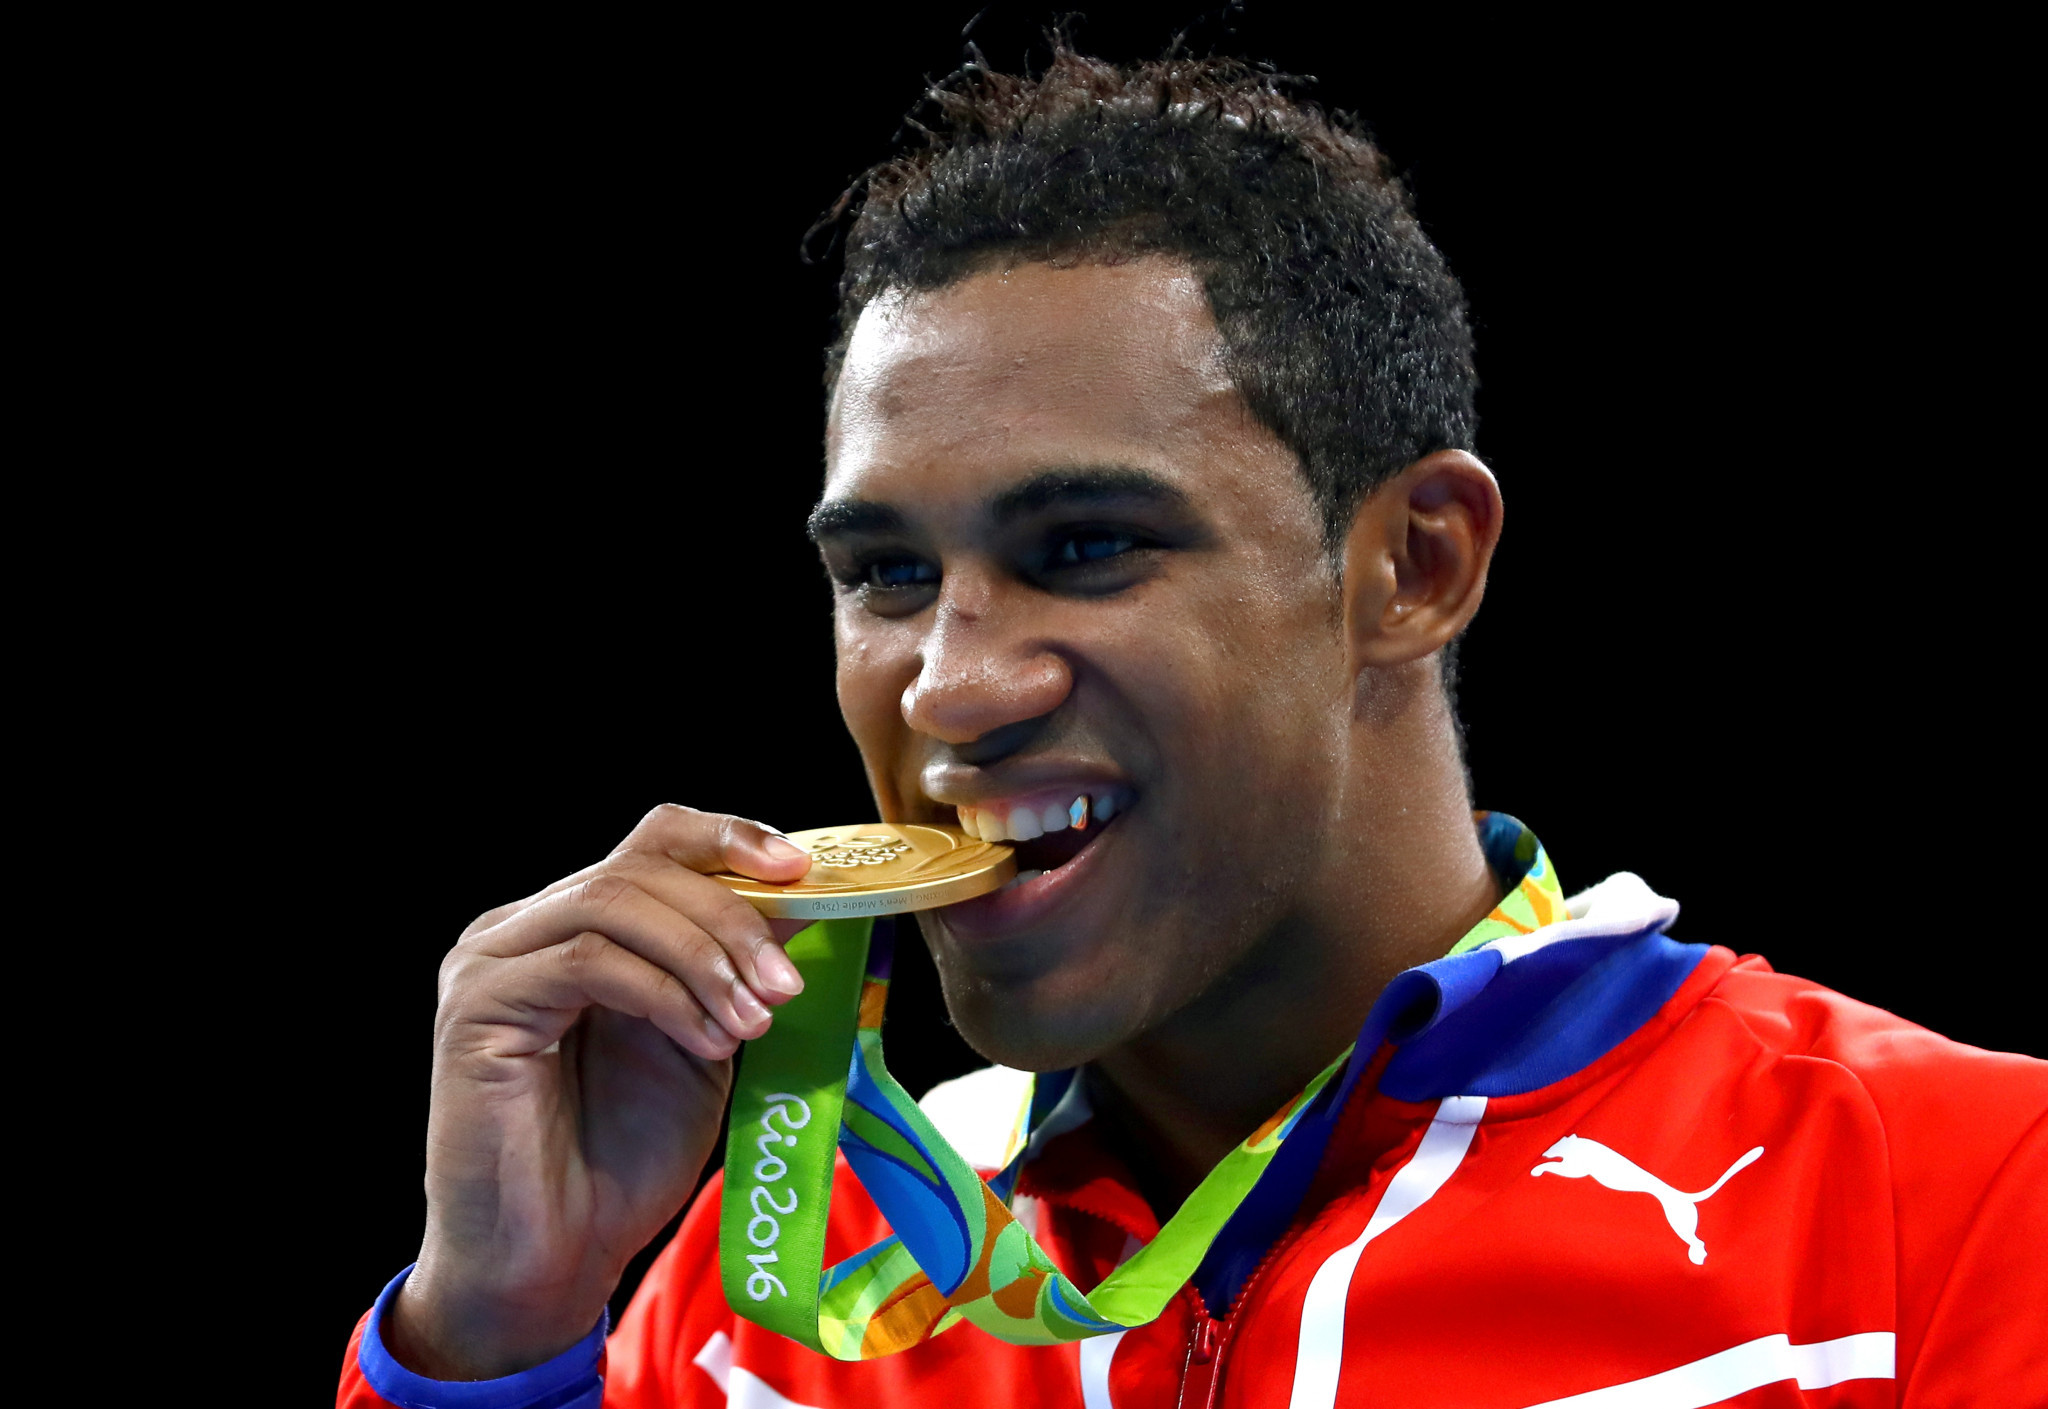 Arlen Lopez is a current Olympic boxing champion ©Getty Images